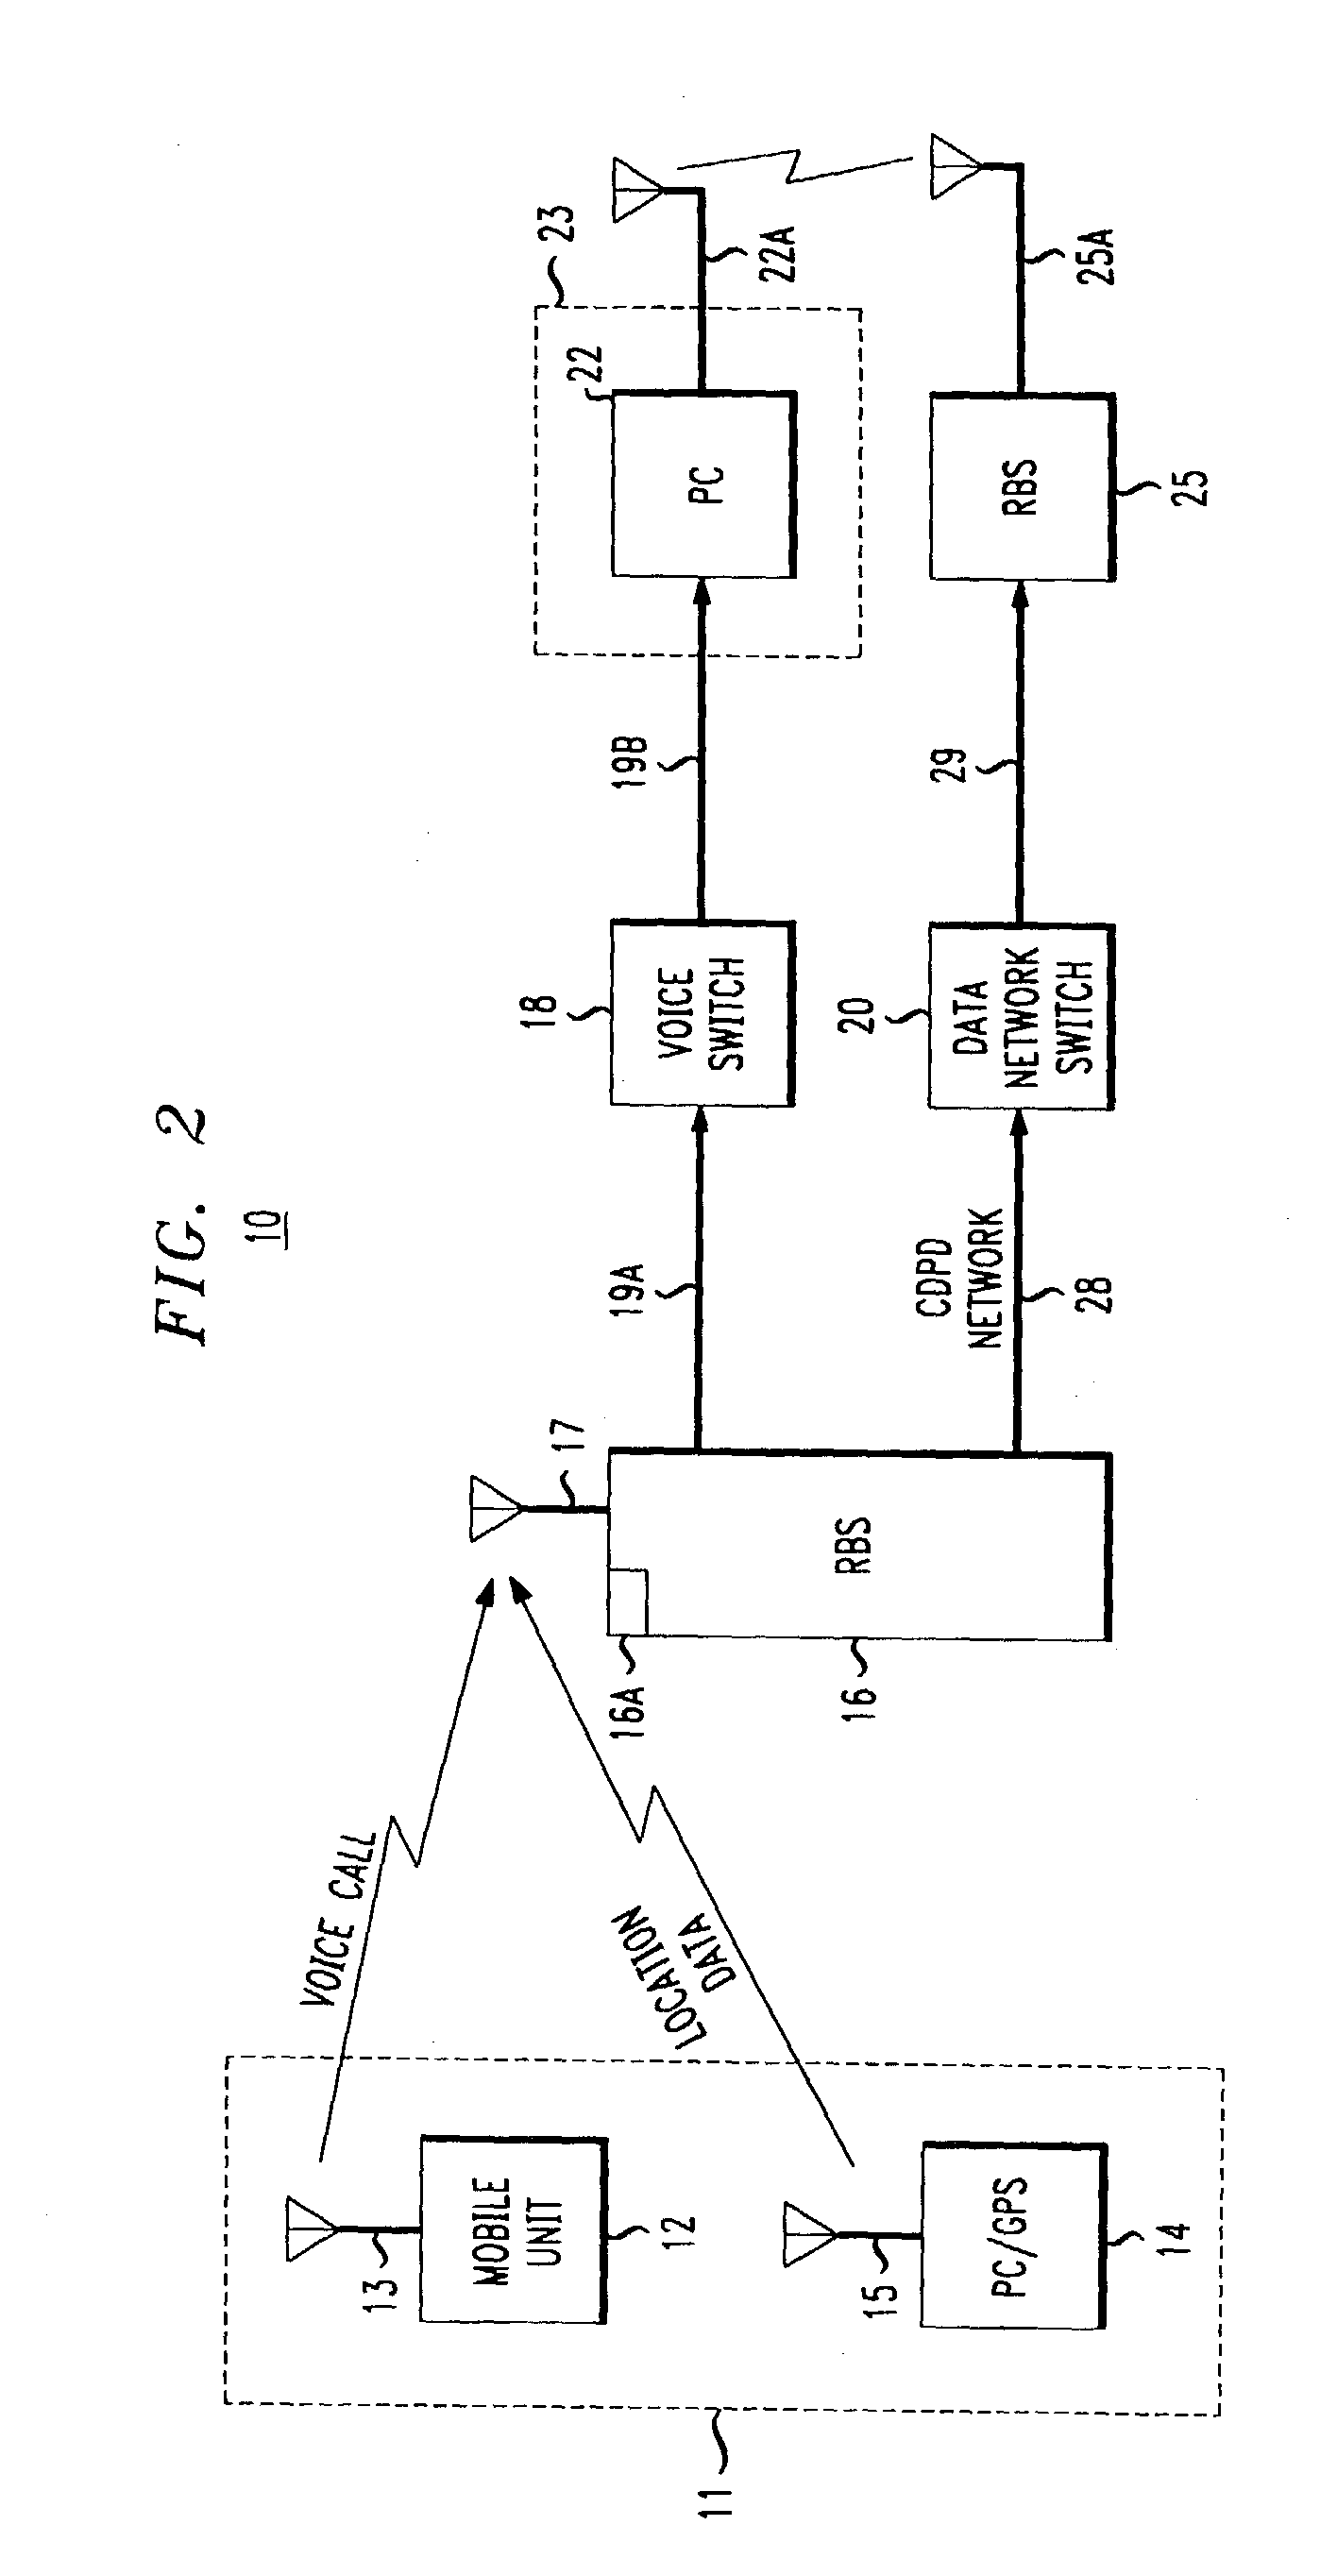 Method and system for optimizing performance of a mobile communications system